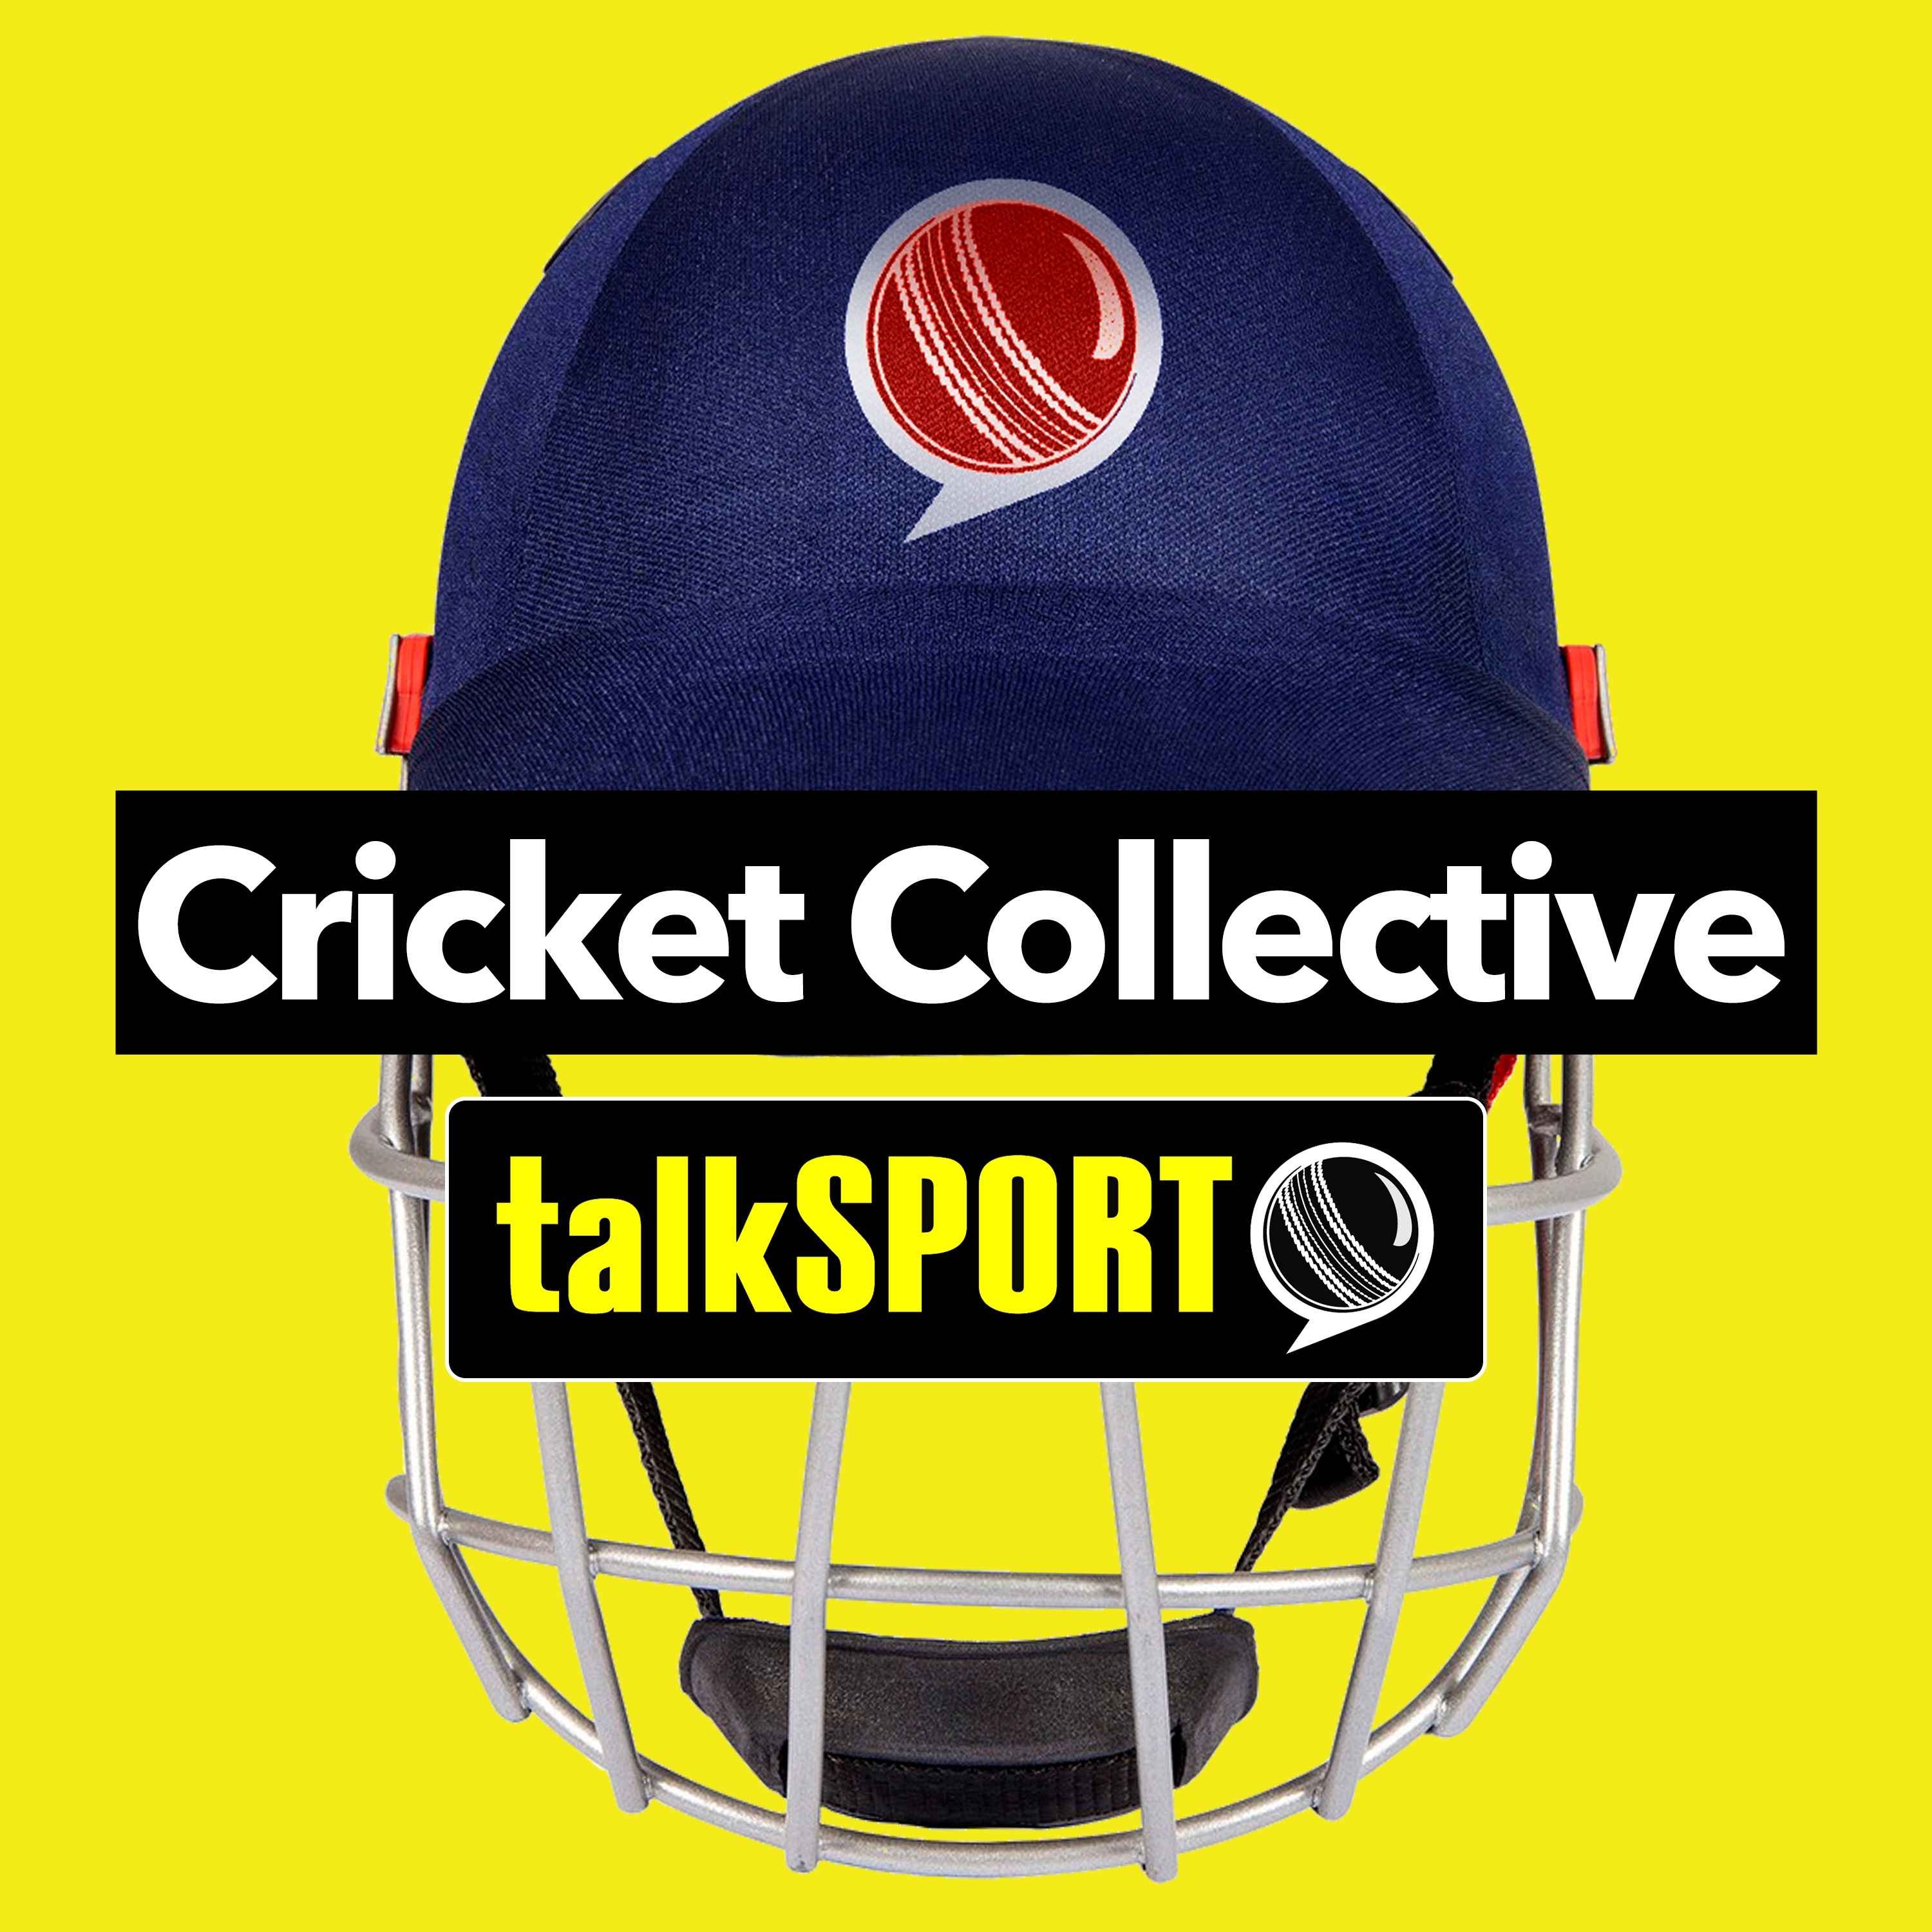 The Cricket Collective - Another Controversial Ashes Moment & Major League Cricket Prepares For Lift Off!